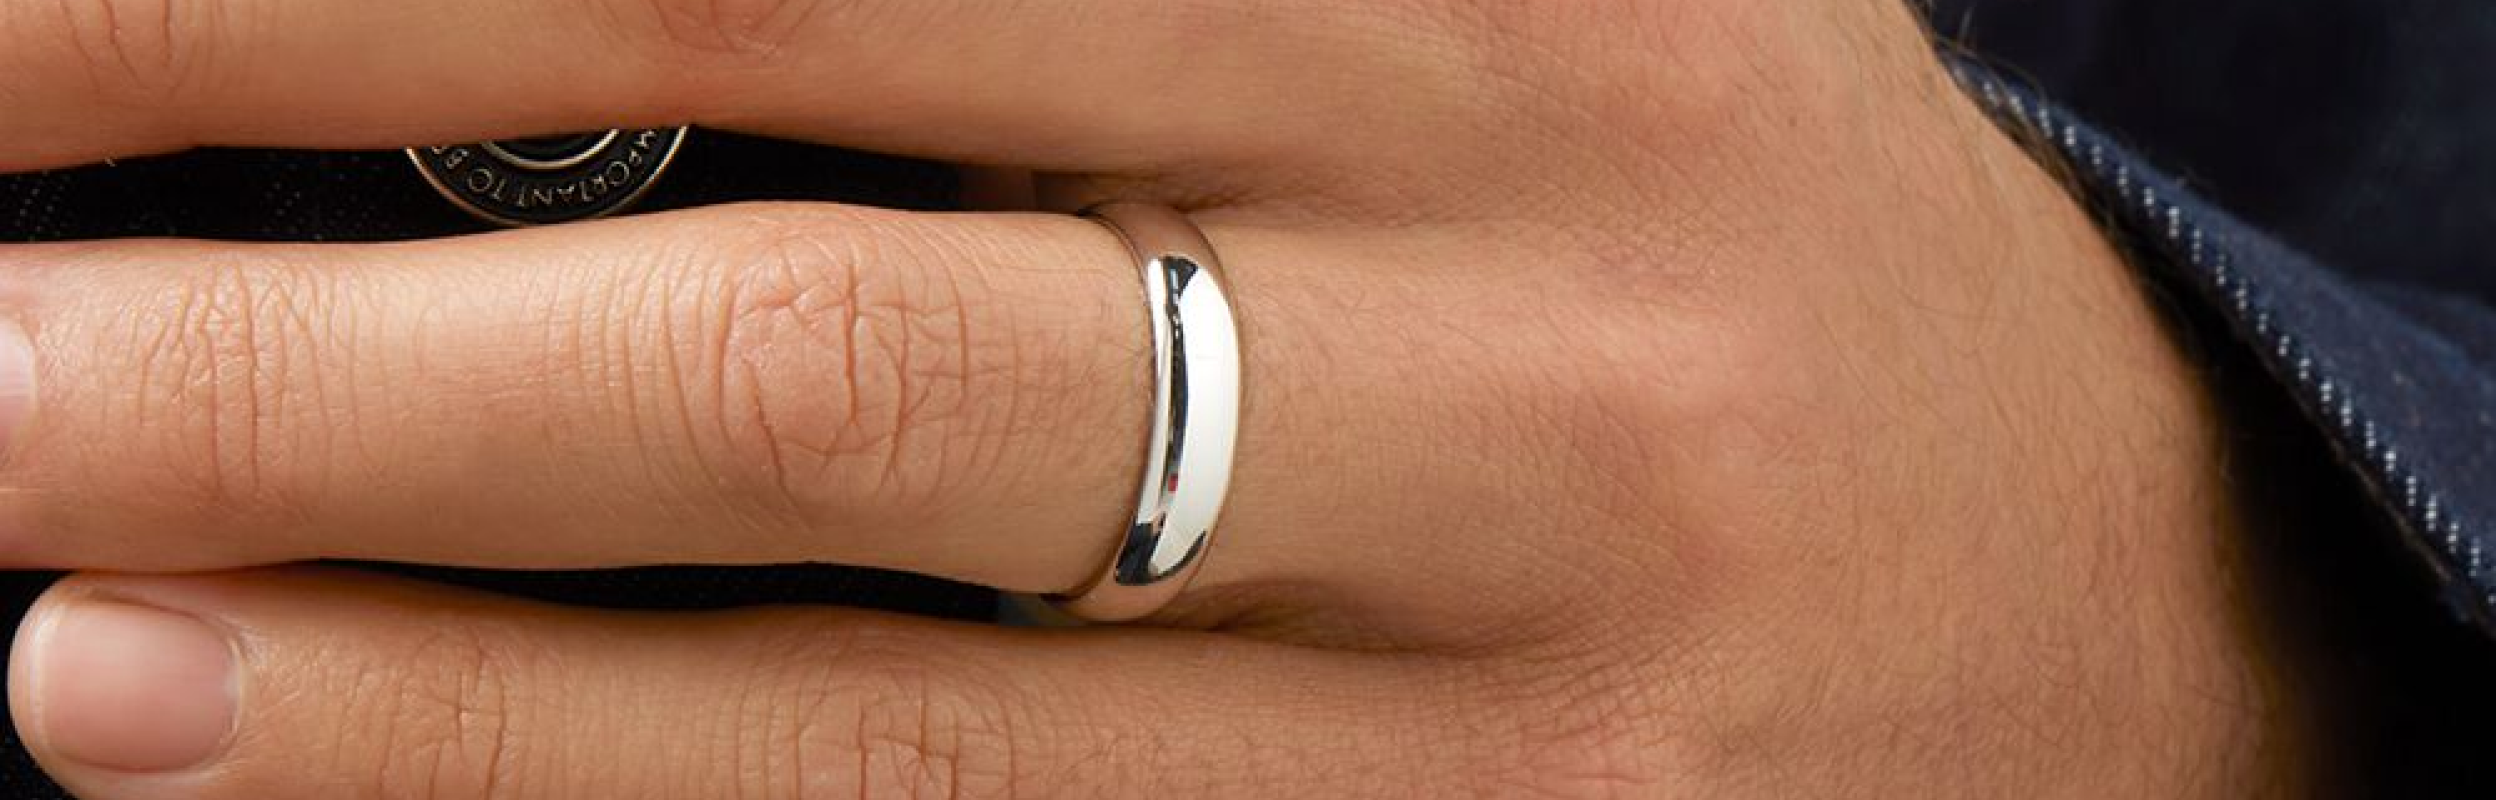 white gold wedding ring on mands hand